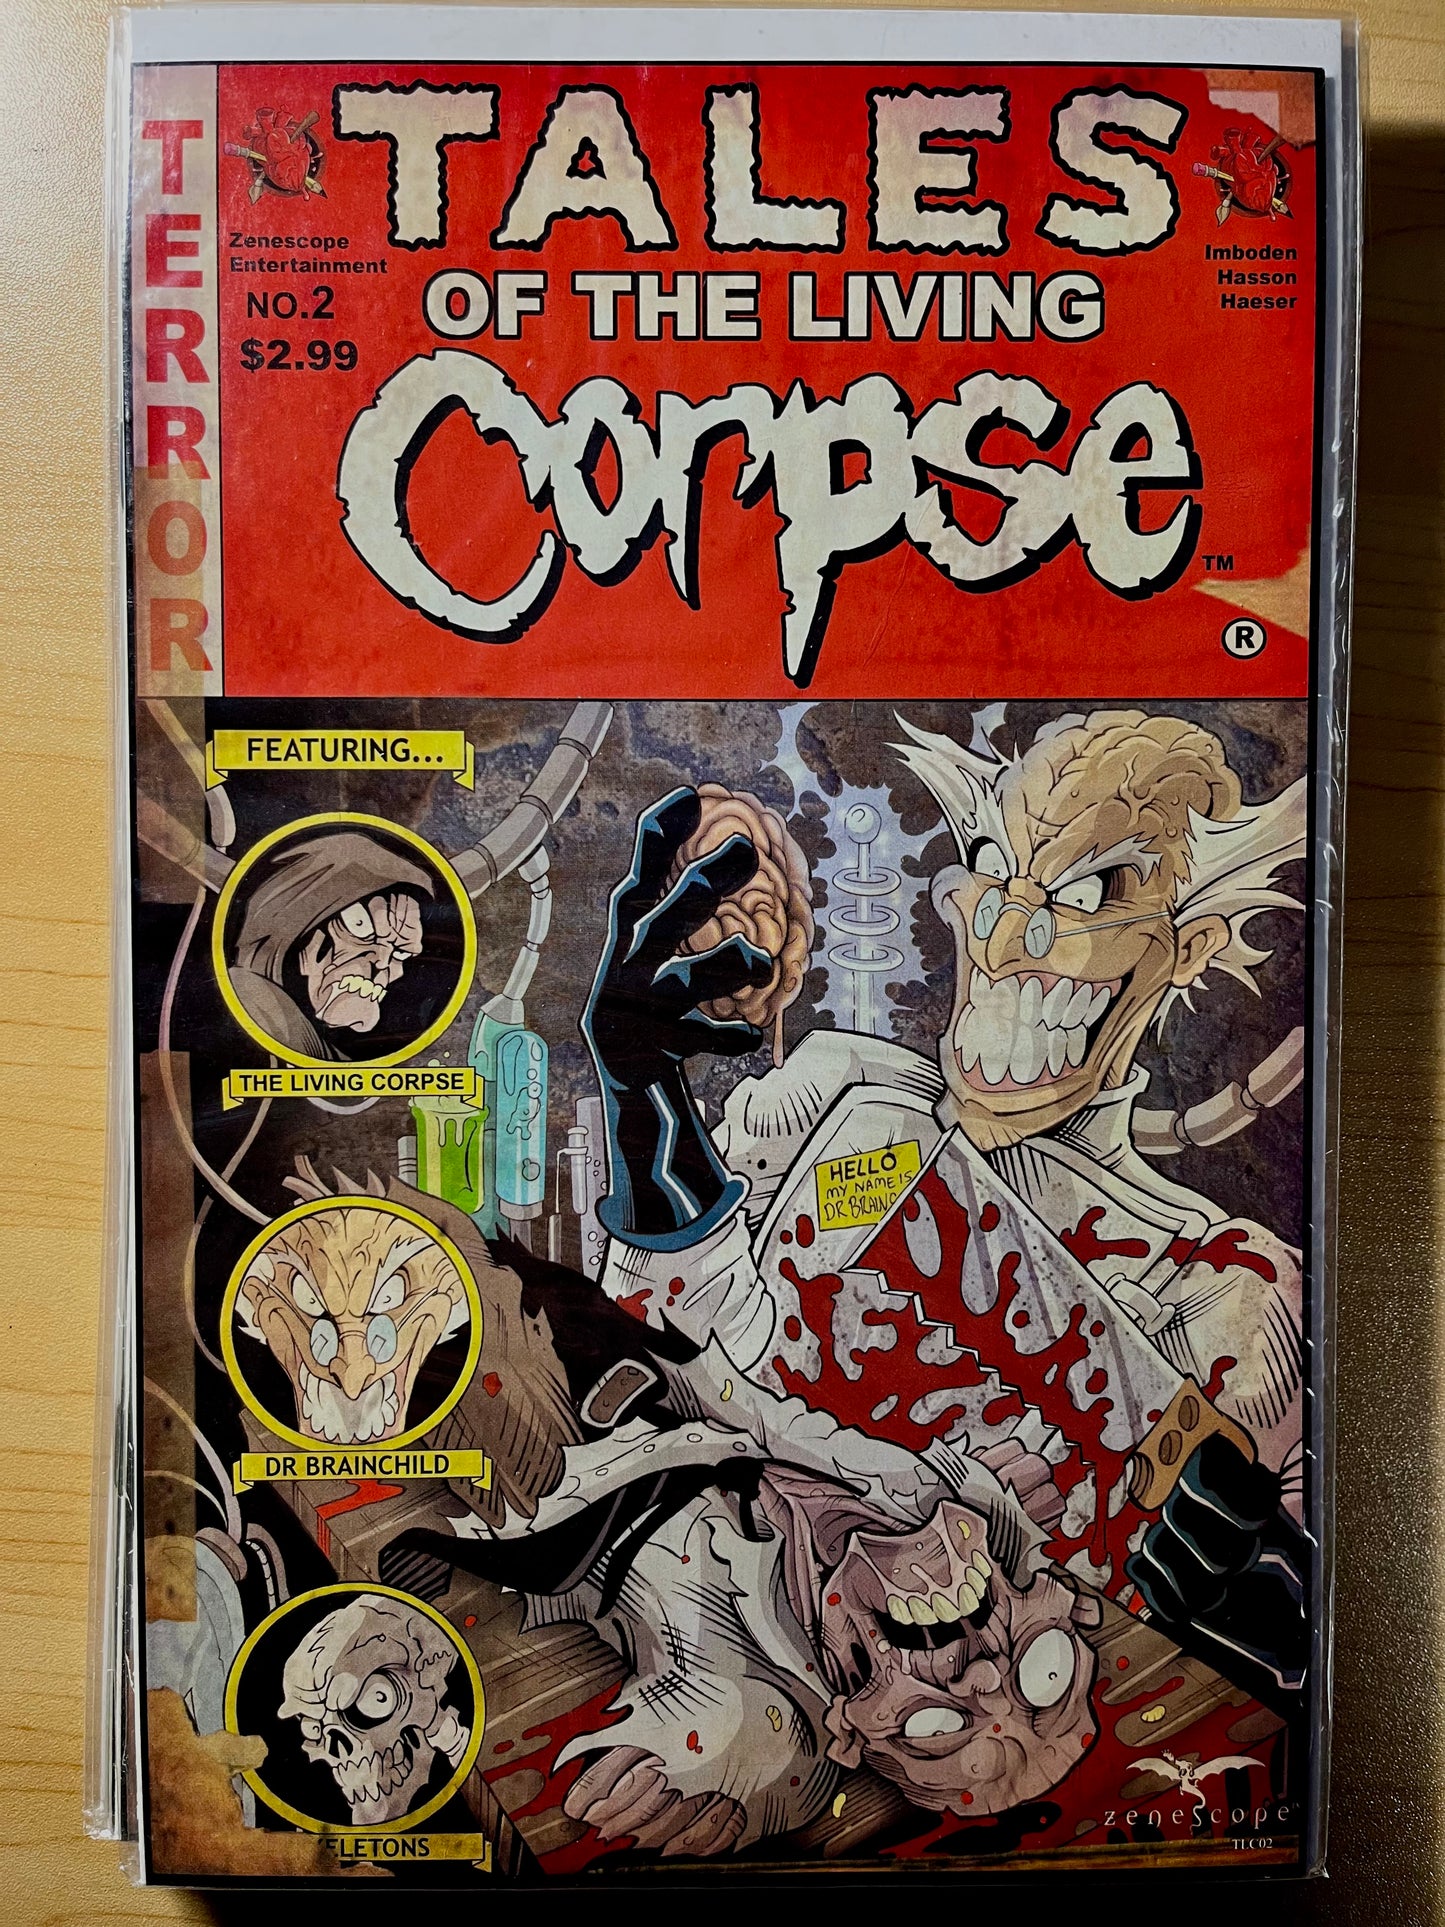 The Living Corpse issue 2 (Dr. Brainchild)2007